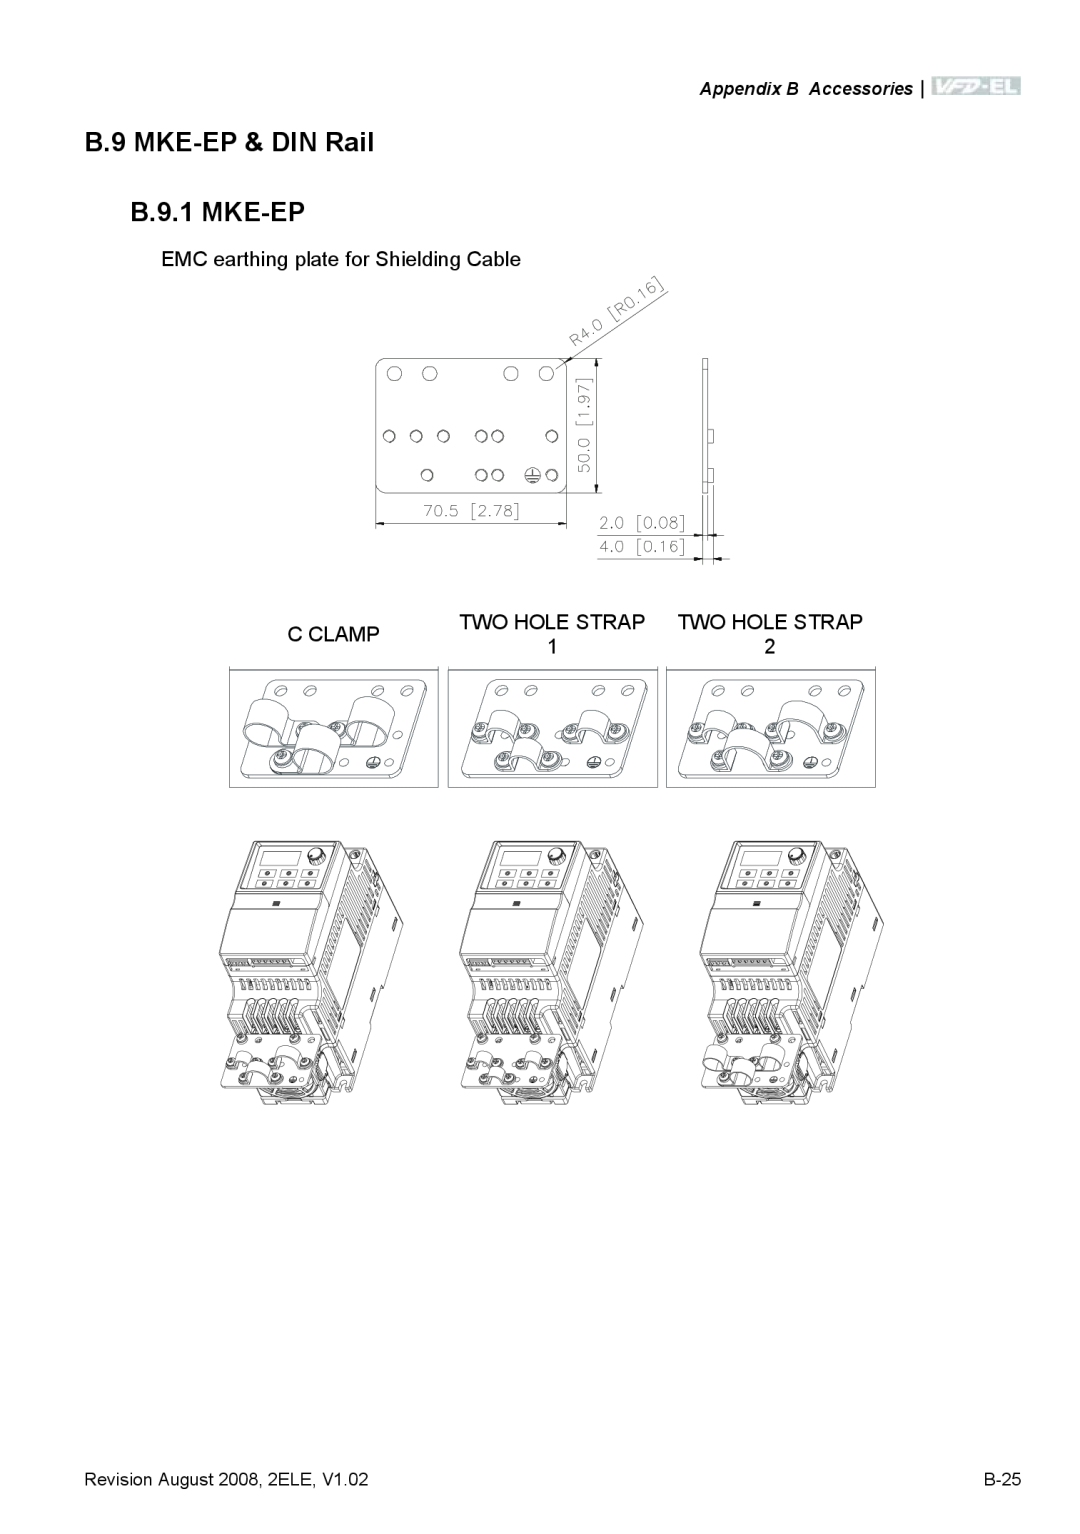 Delta Electronics VFD-EL manual B.9 MKE-EP & DIN Rail B.9.1 MKE-EP, EMC earthing plate for Shielding Cable, C Clamp, B-25 